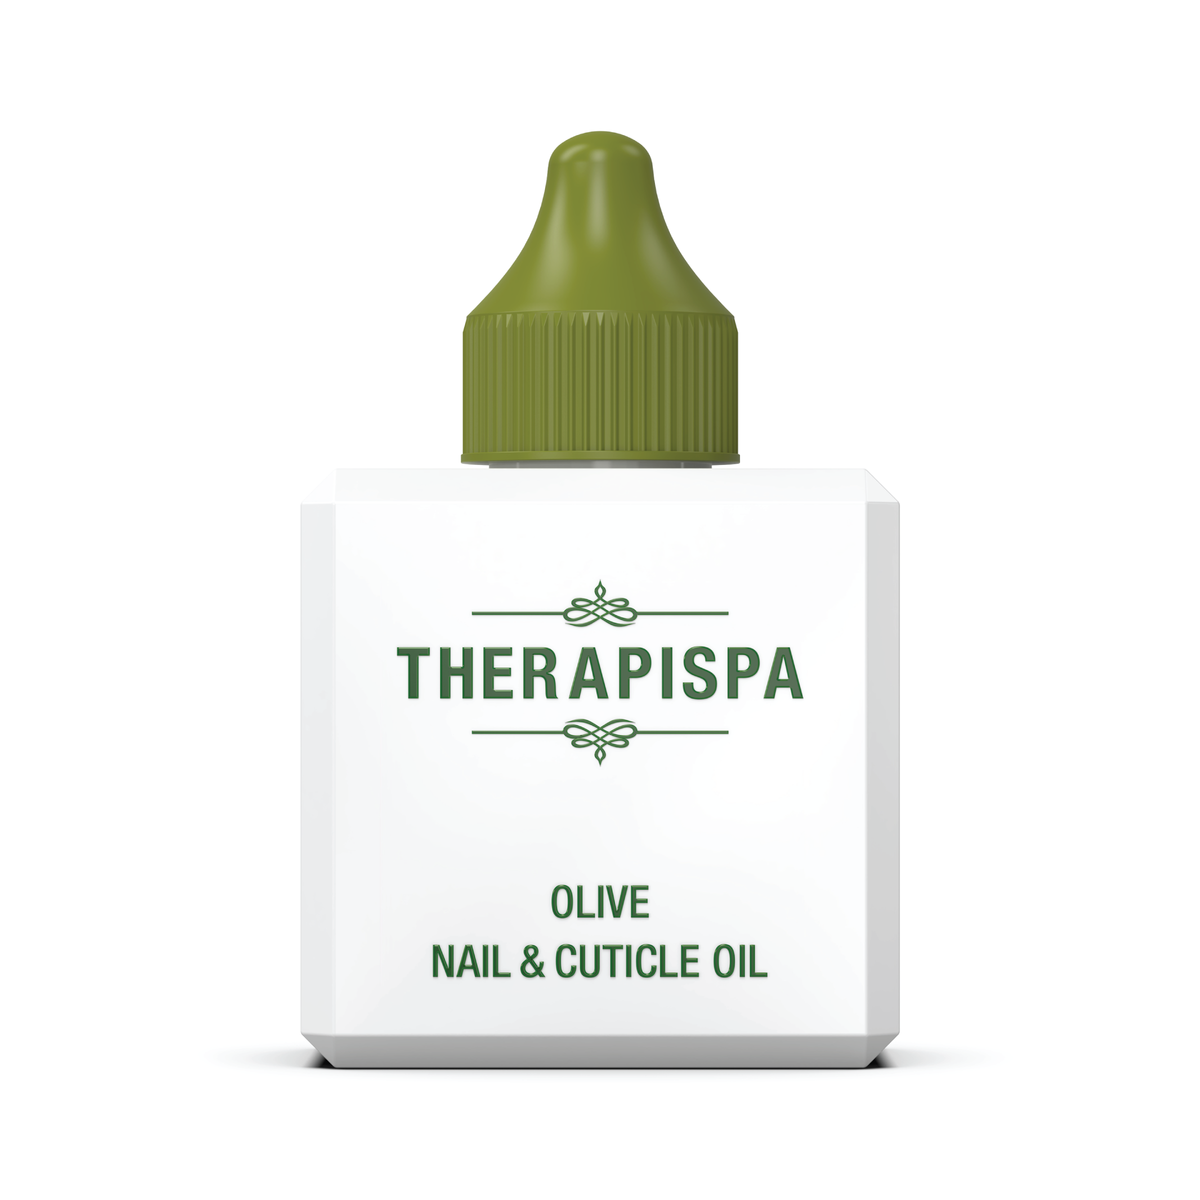 Nail and Cuticle Oil / Olive